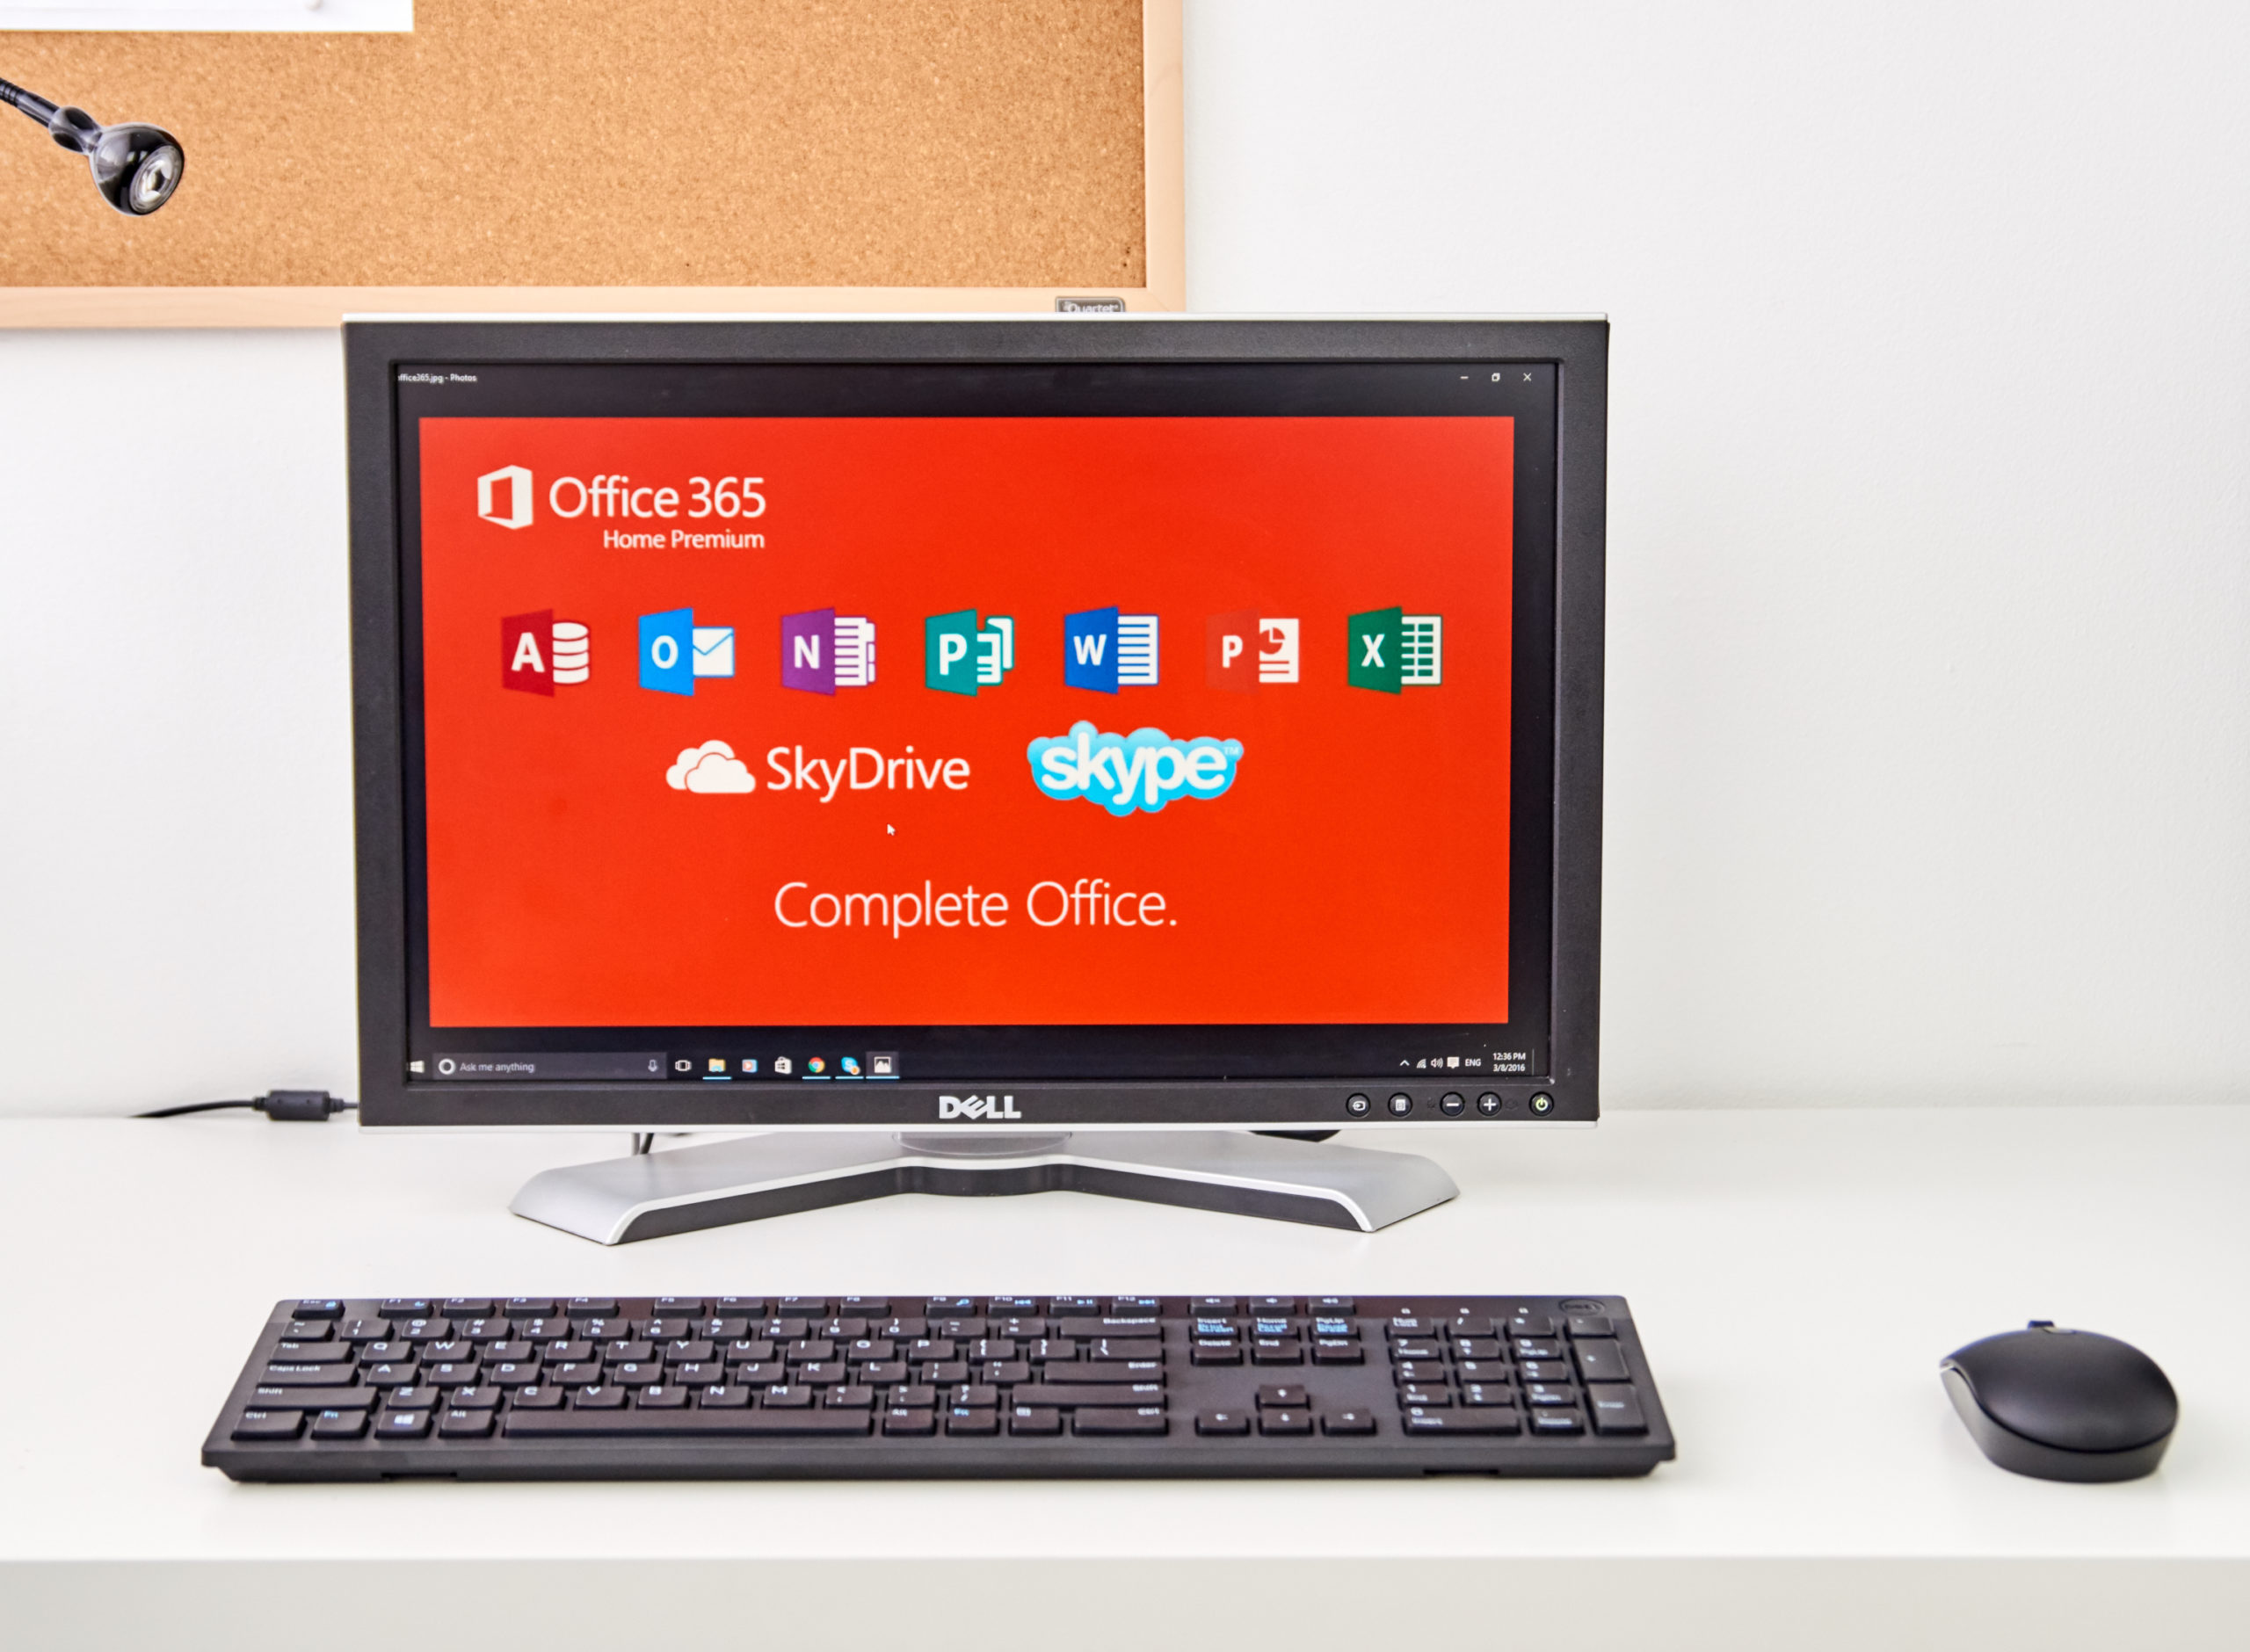 What’s the Best Way to Secure Office 365?